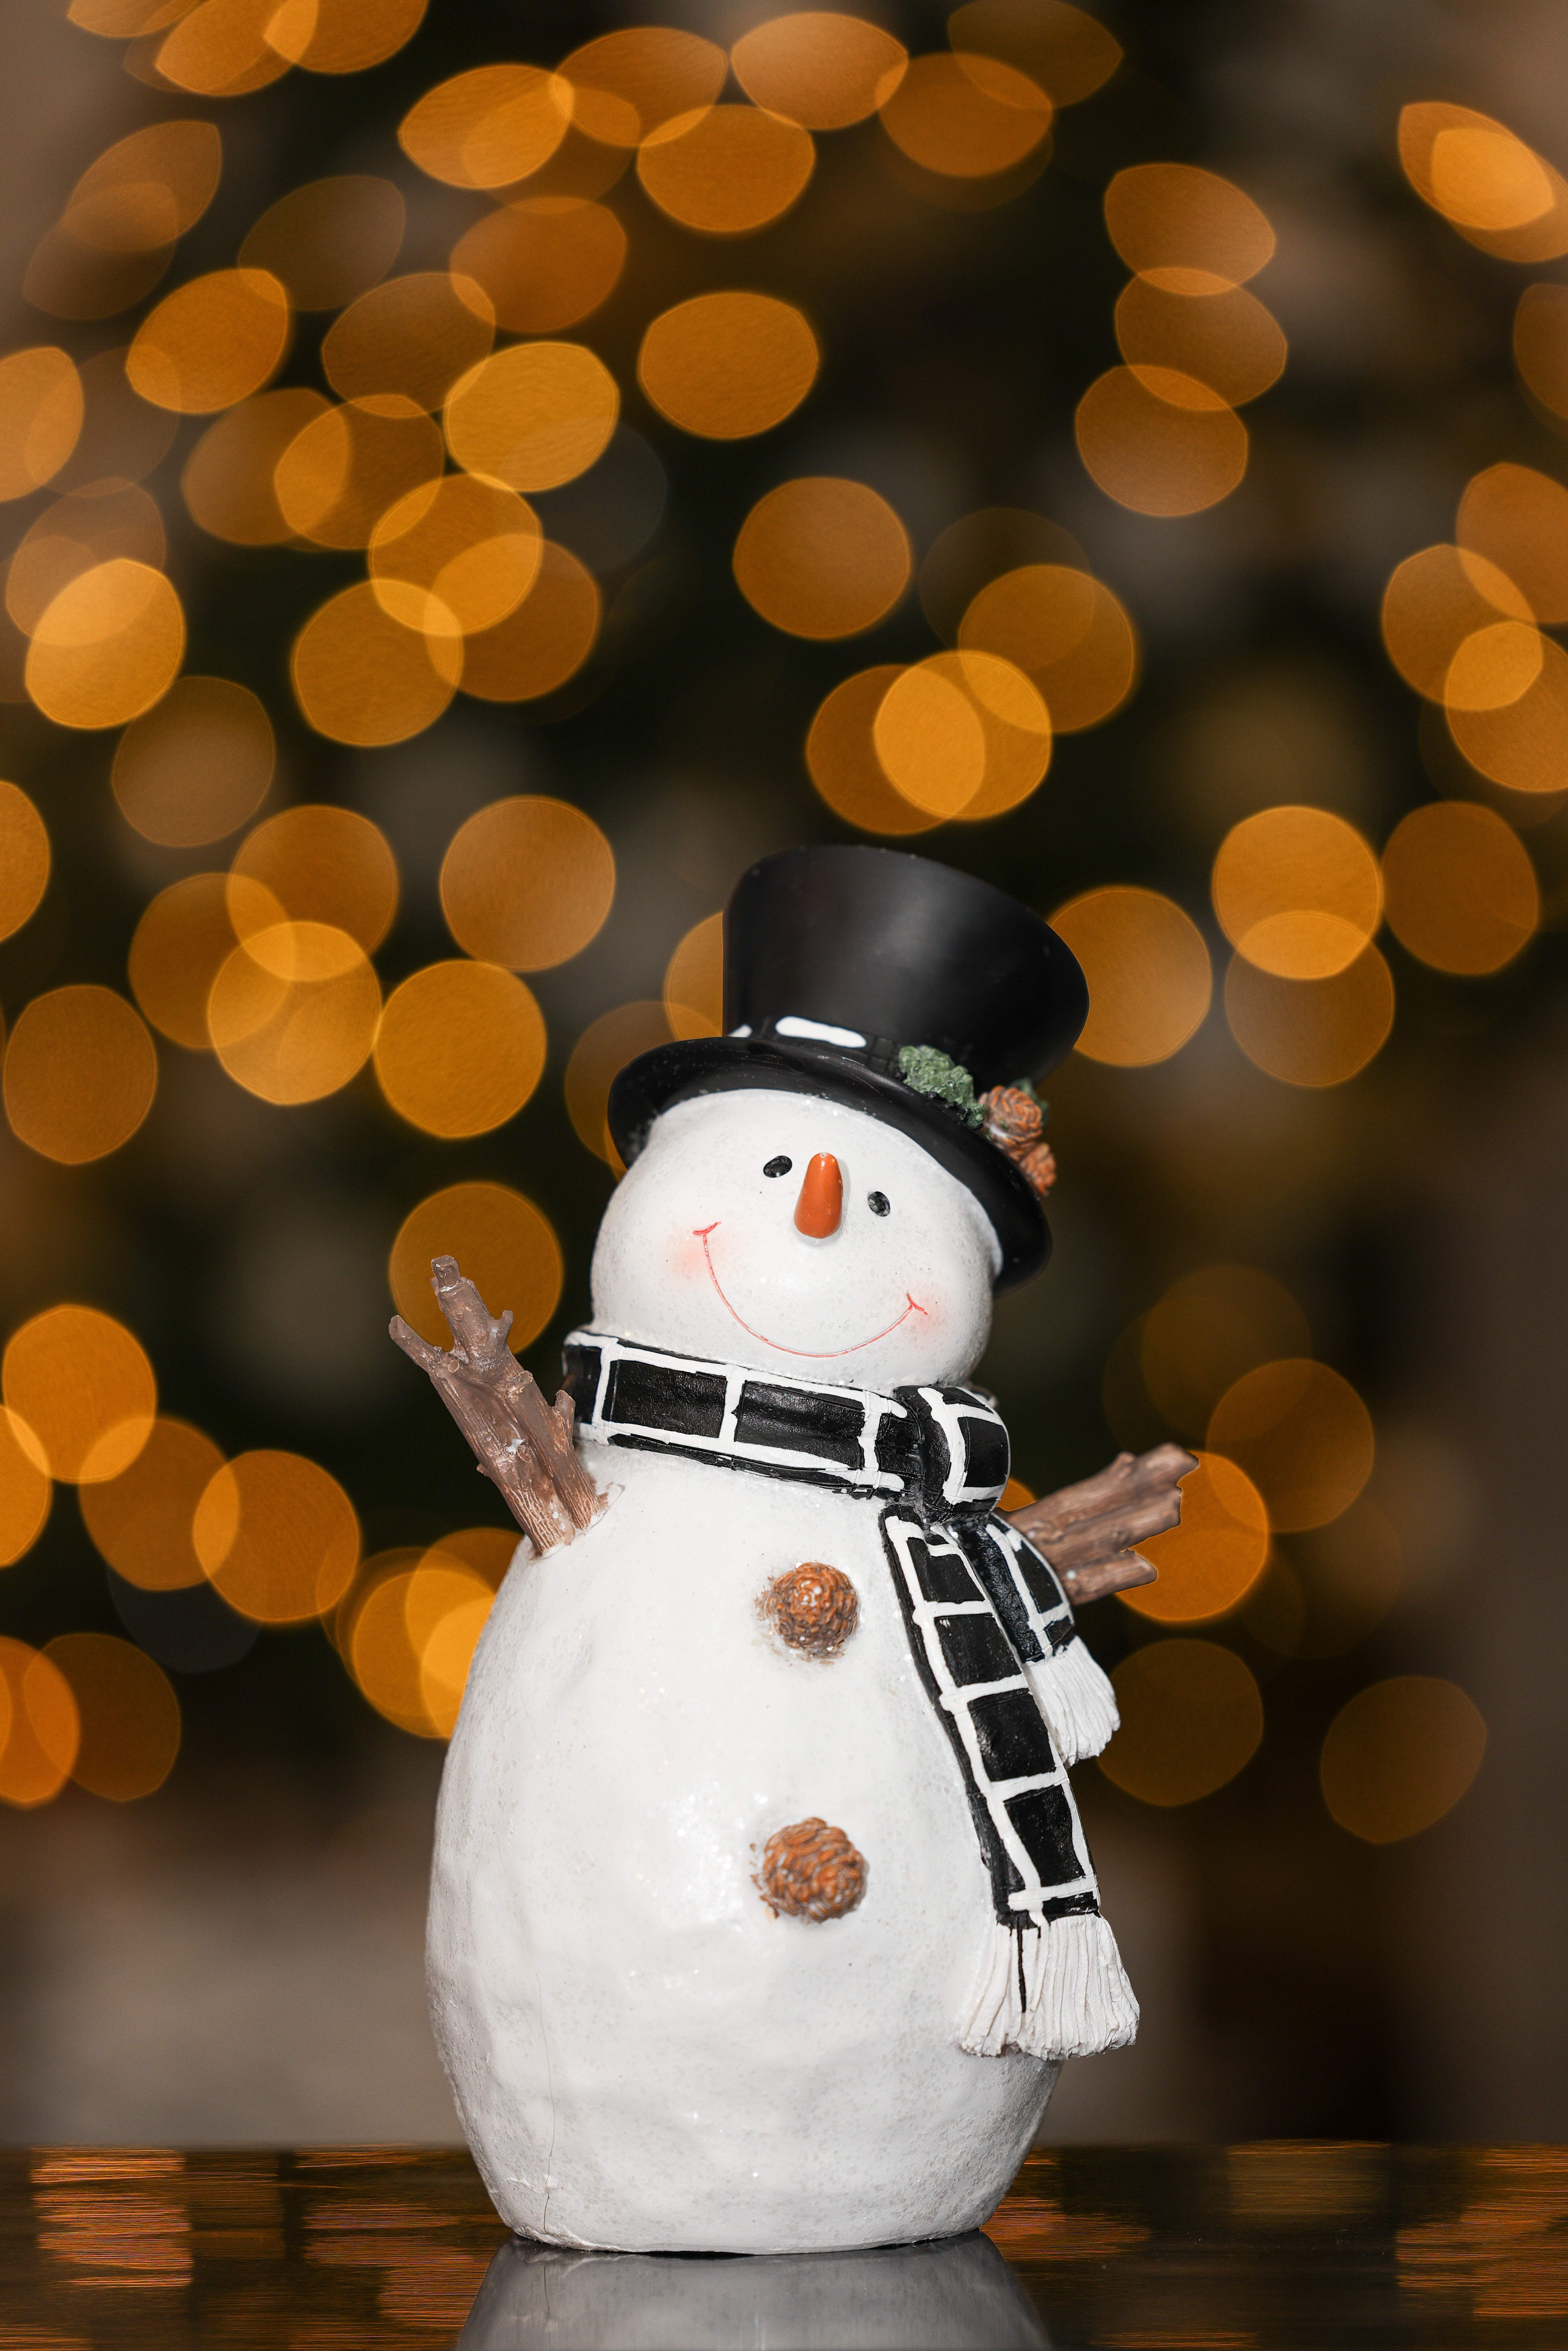 Lovely picture of a very happy snowman.